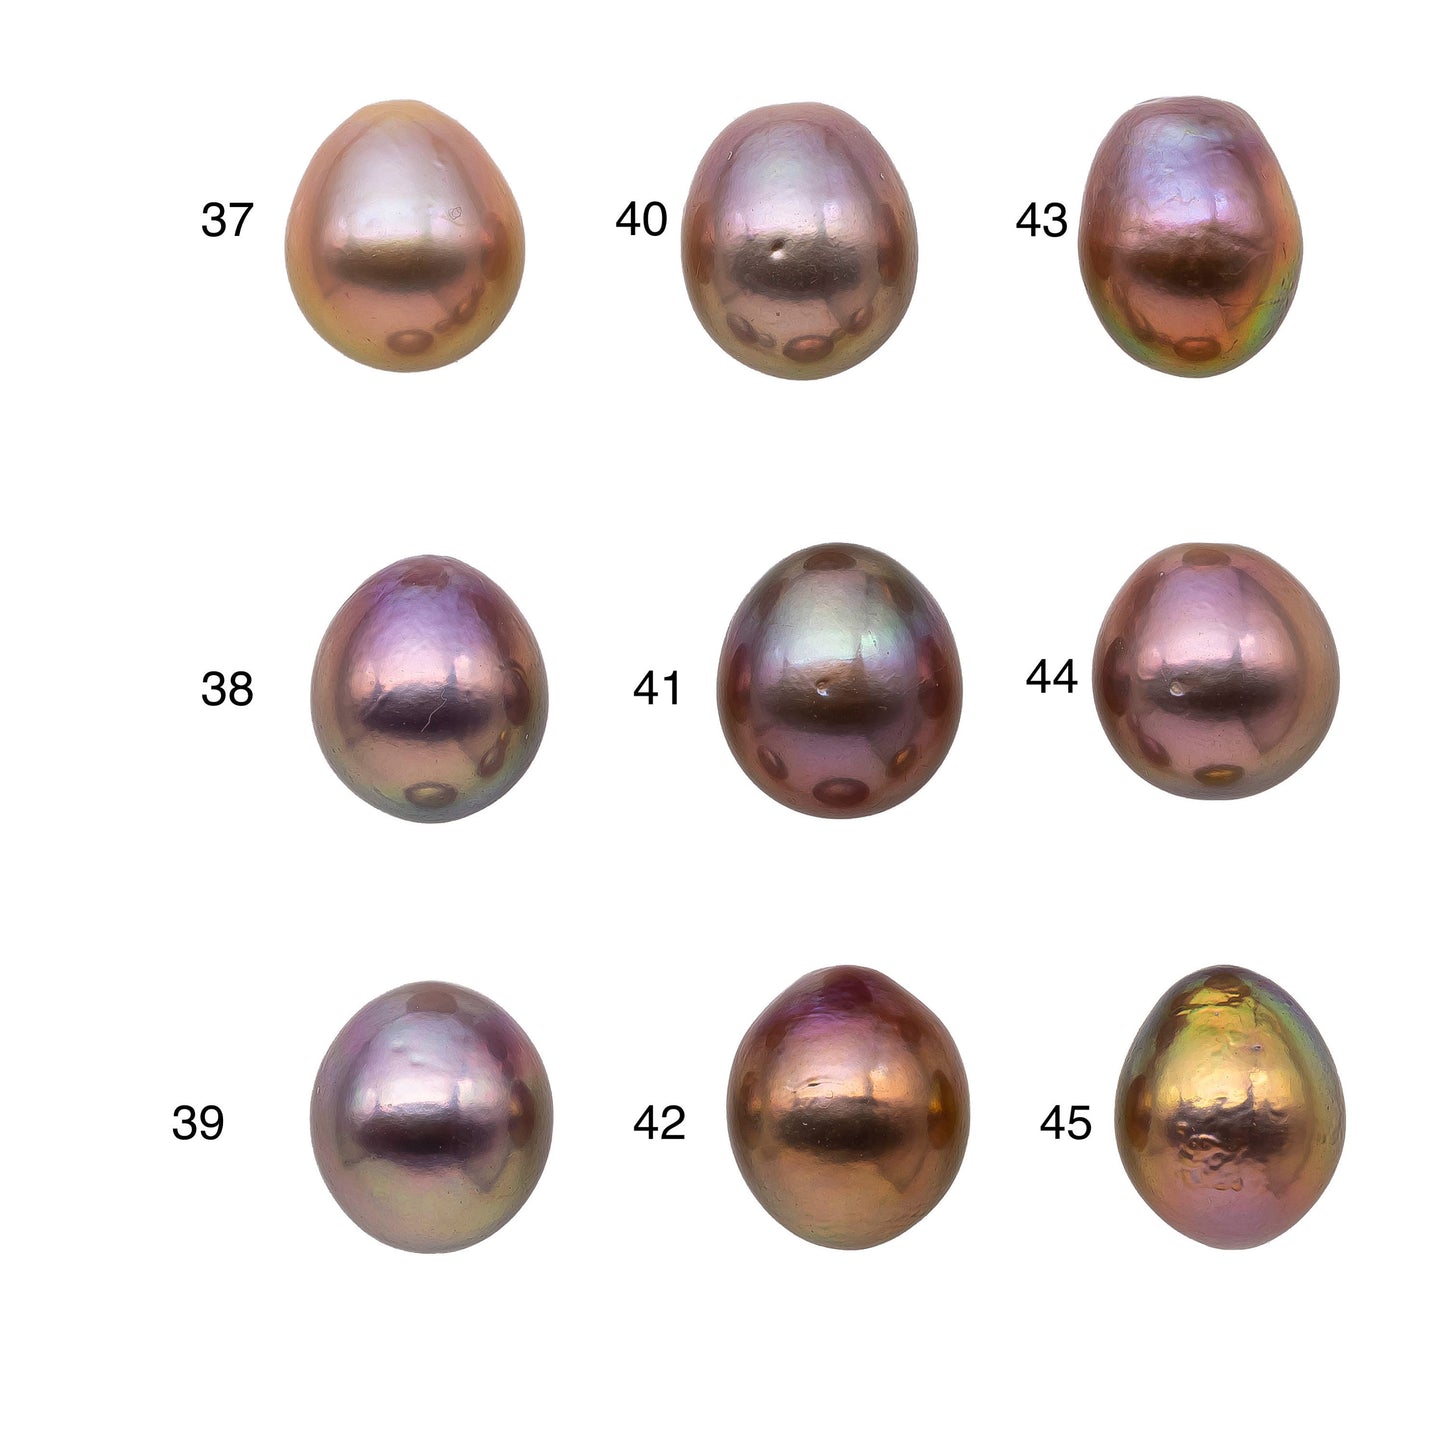 11-12mm One Piece Edison Pearl Undrilled Freshwater Pearl with Minor Flaws and Very Nice Luster for Jewelry Design, SKU # 1168EP